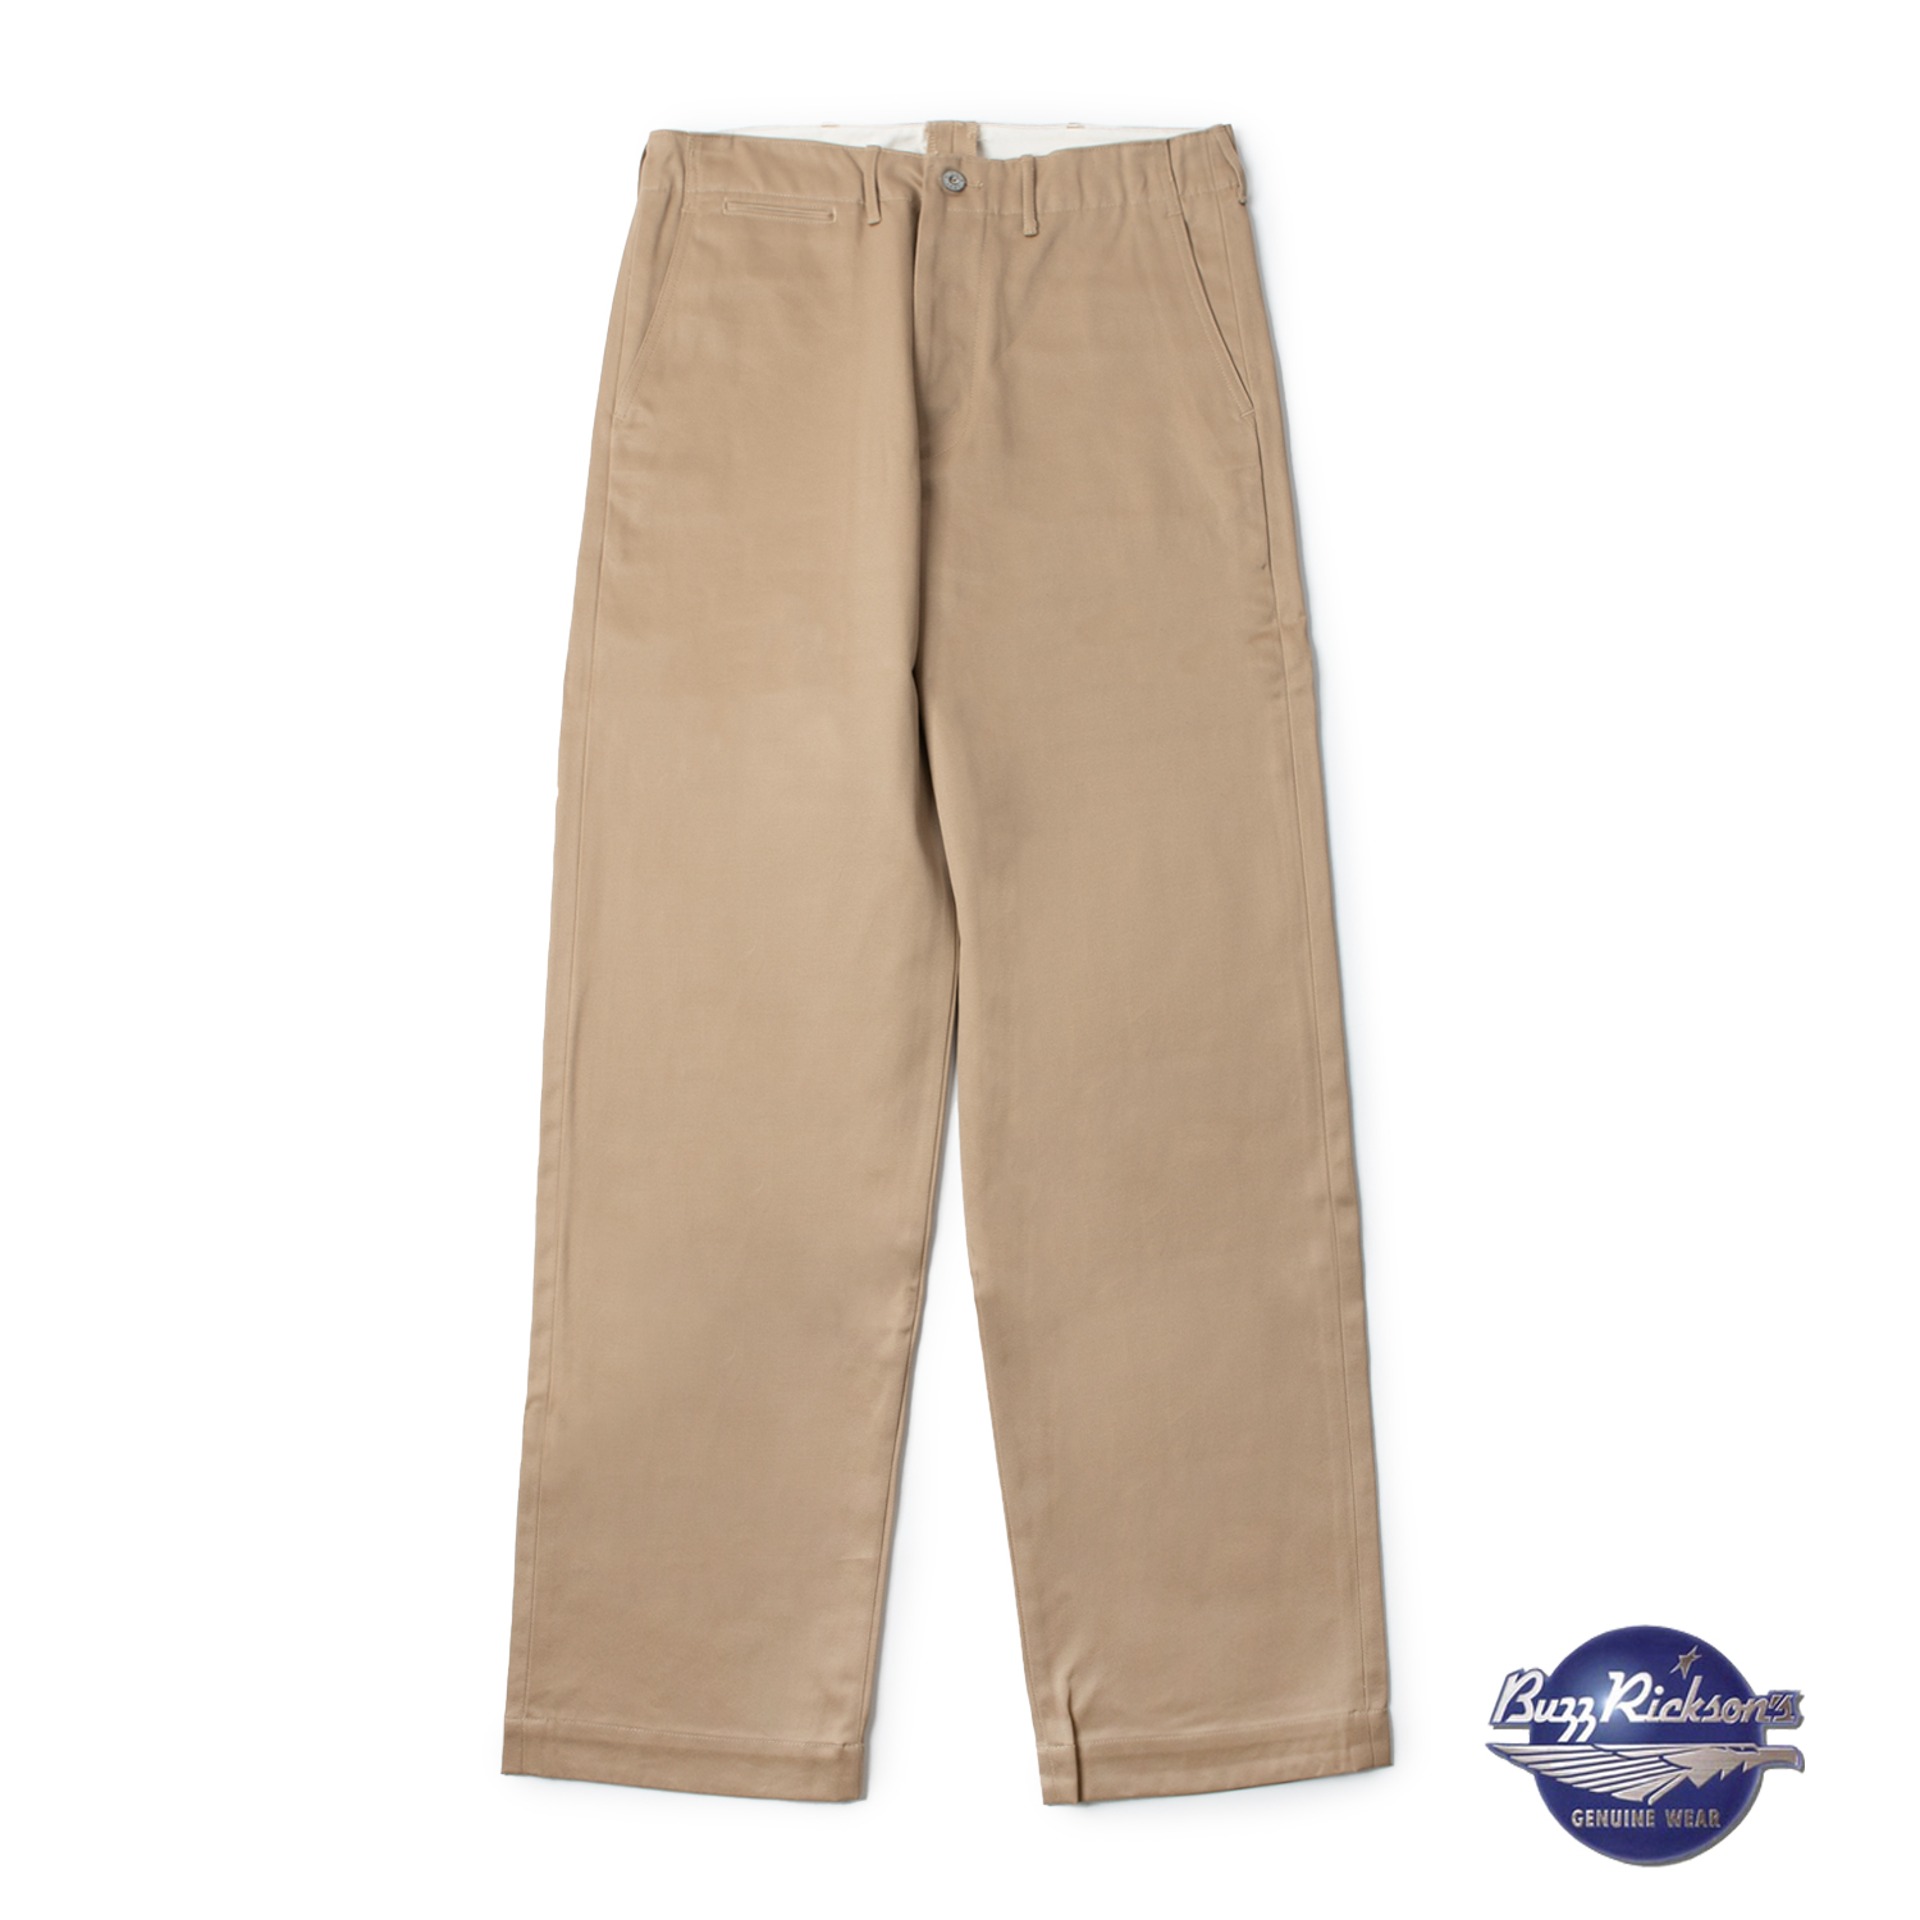 EARLY MILITARY CHINOS 1945 MODEL (Beige)